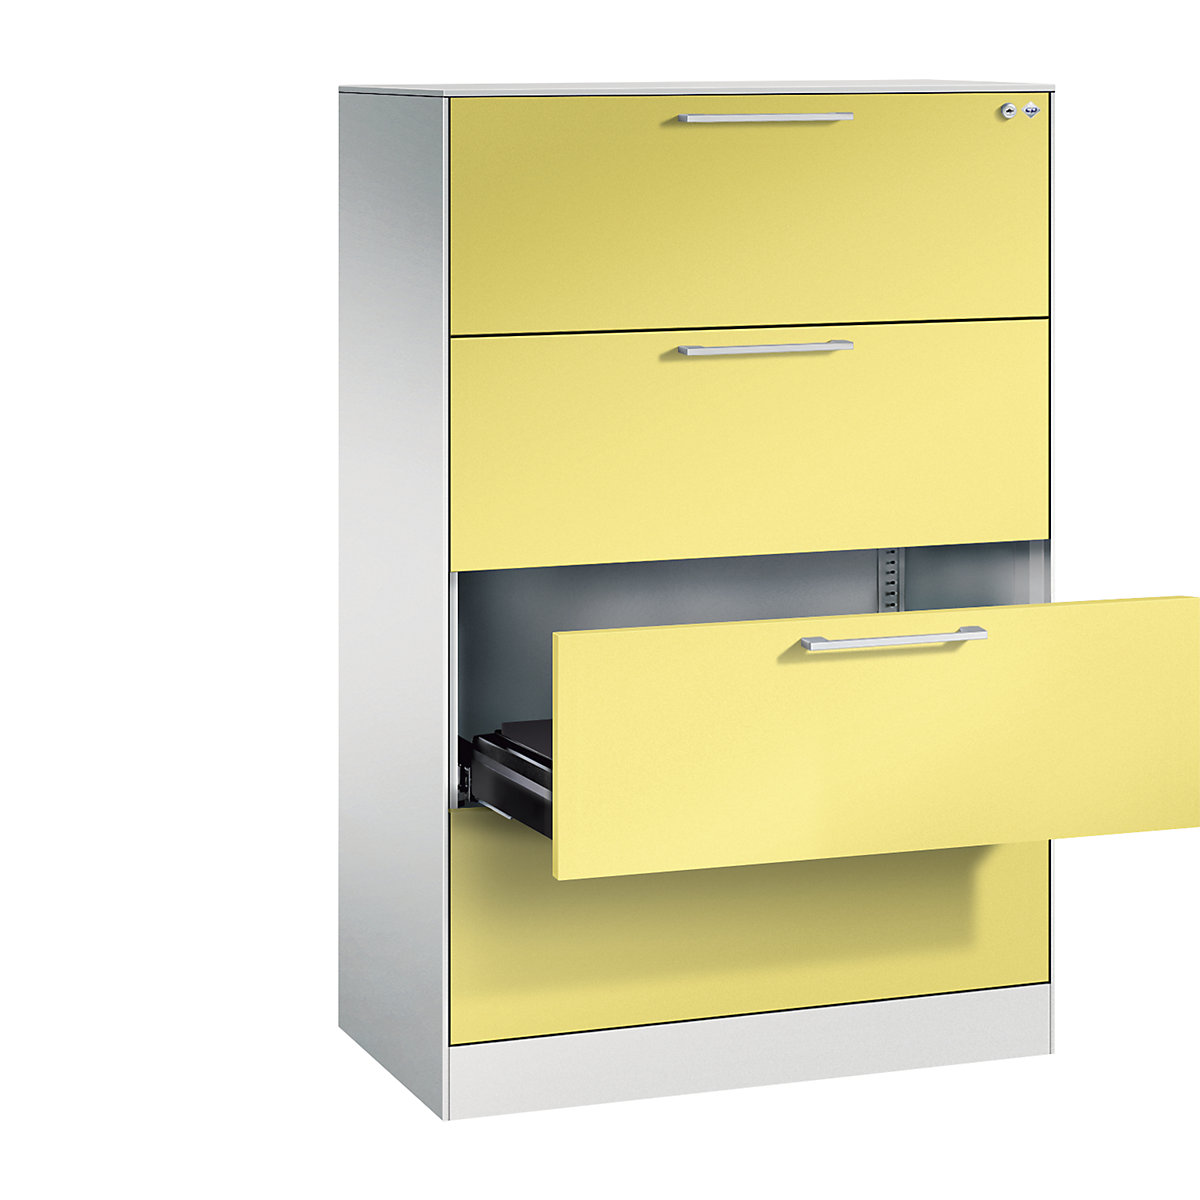 ASISTO card file cabinet – C+P, height 1292 mm, with 4 drawers, A4 landscape, light grey/sulphur yellow-5